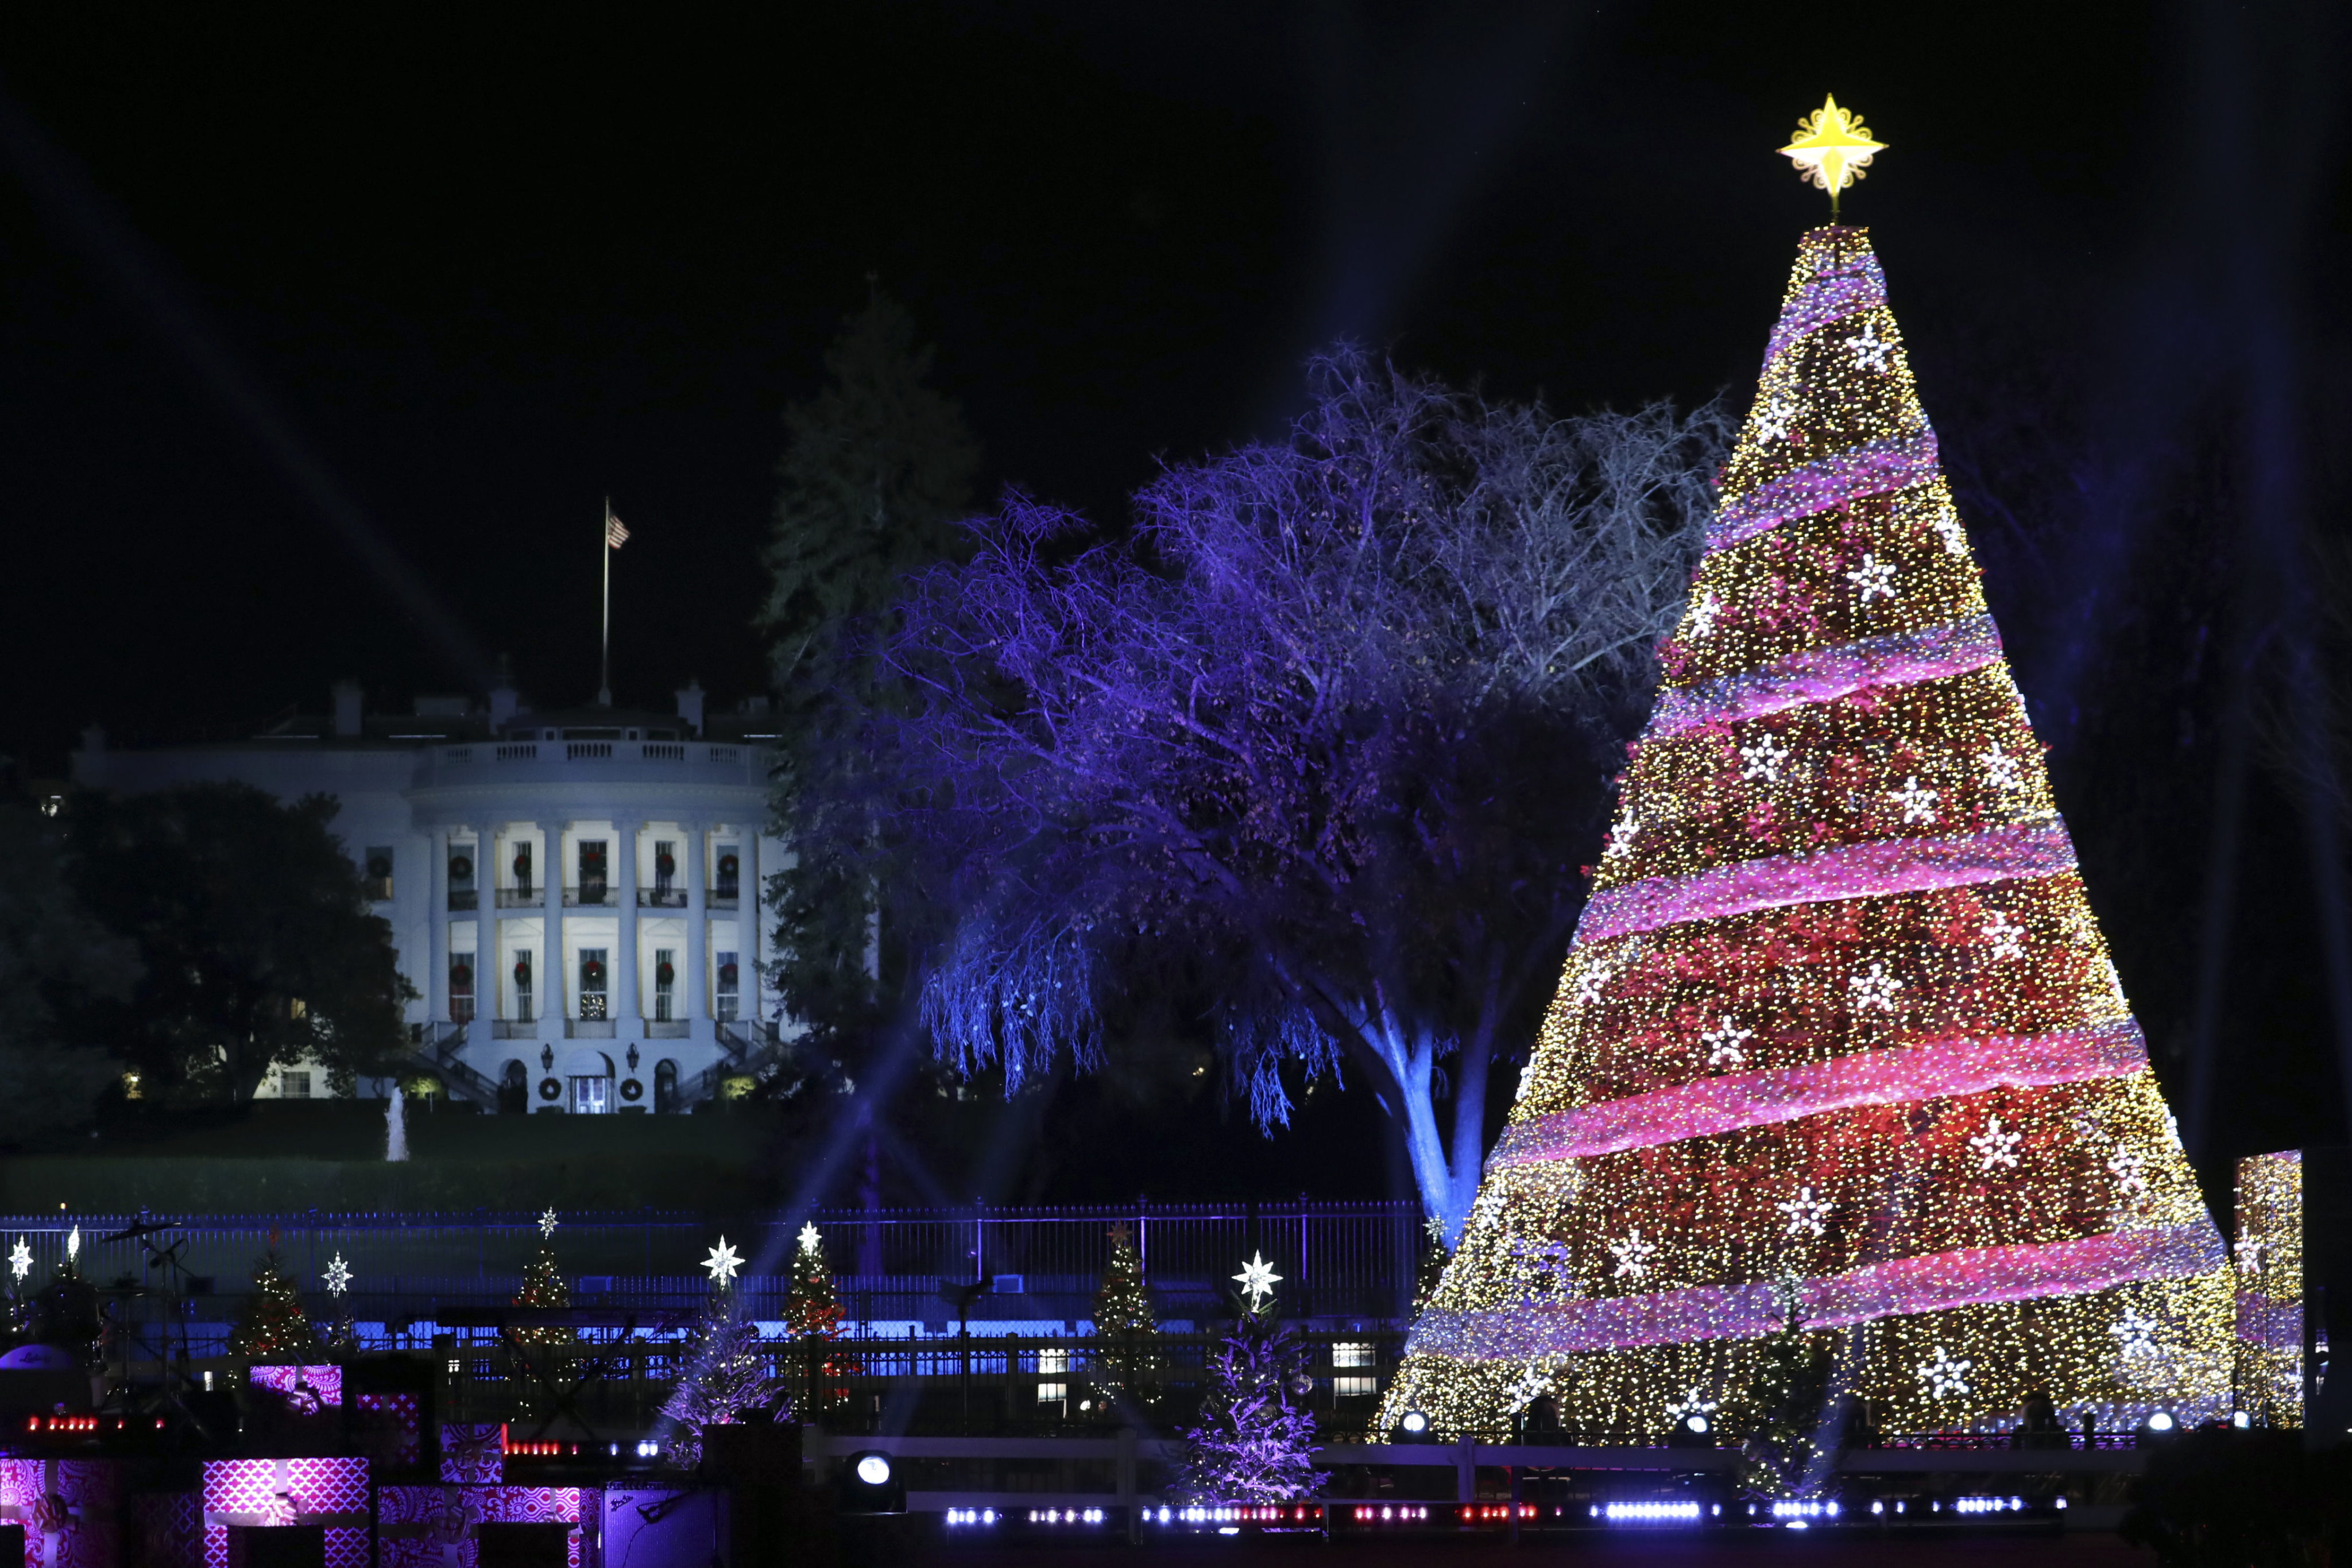 There’s still time to score tickets to National Christmas Tree lighting